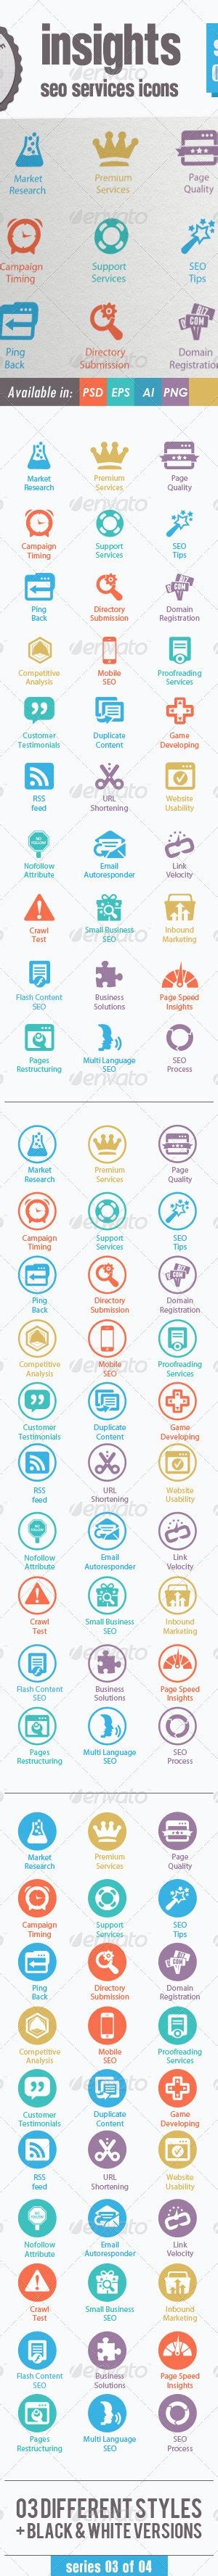 Insights Seo Services Icons Series 03 Of 04 By Kh2838 Graphicriver